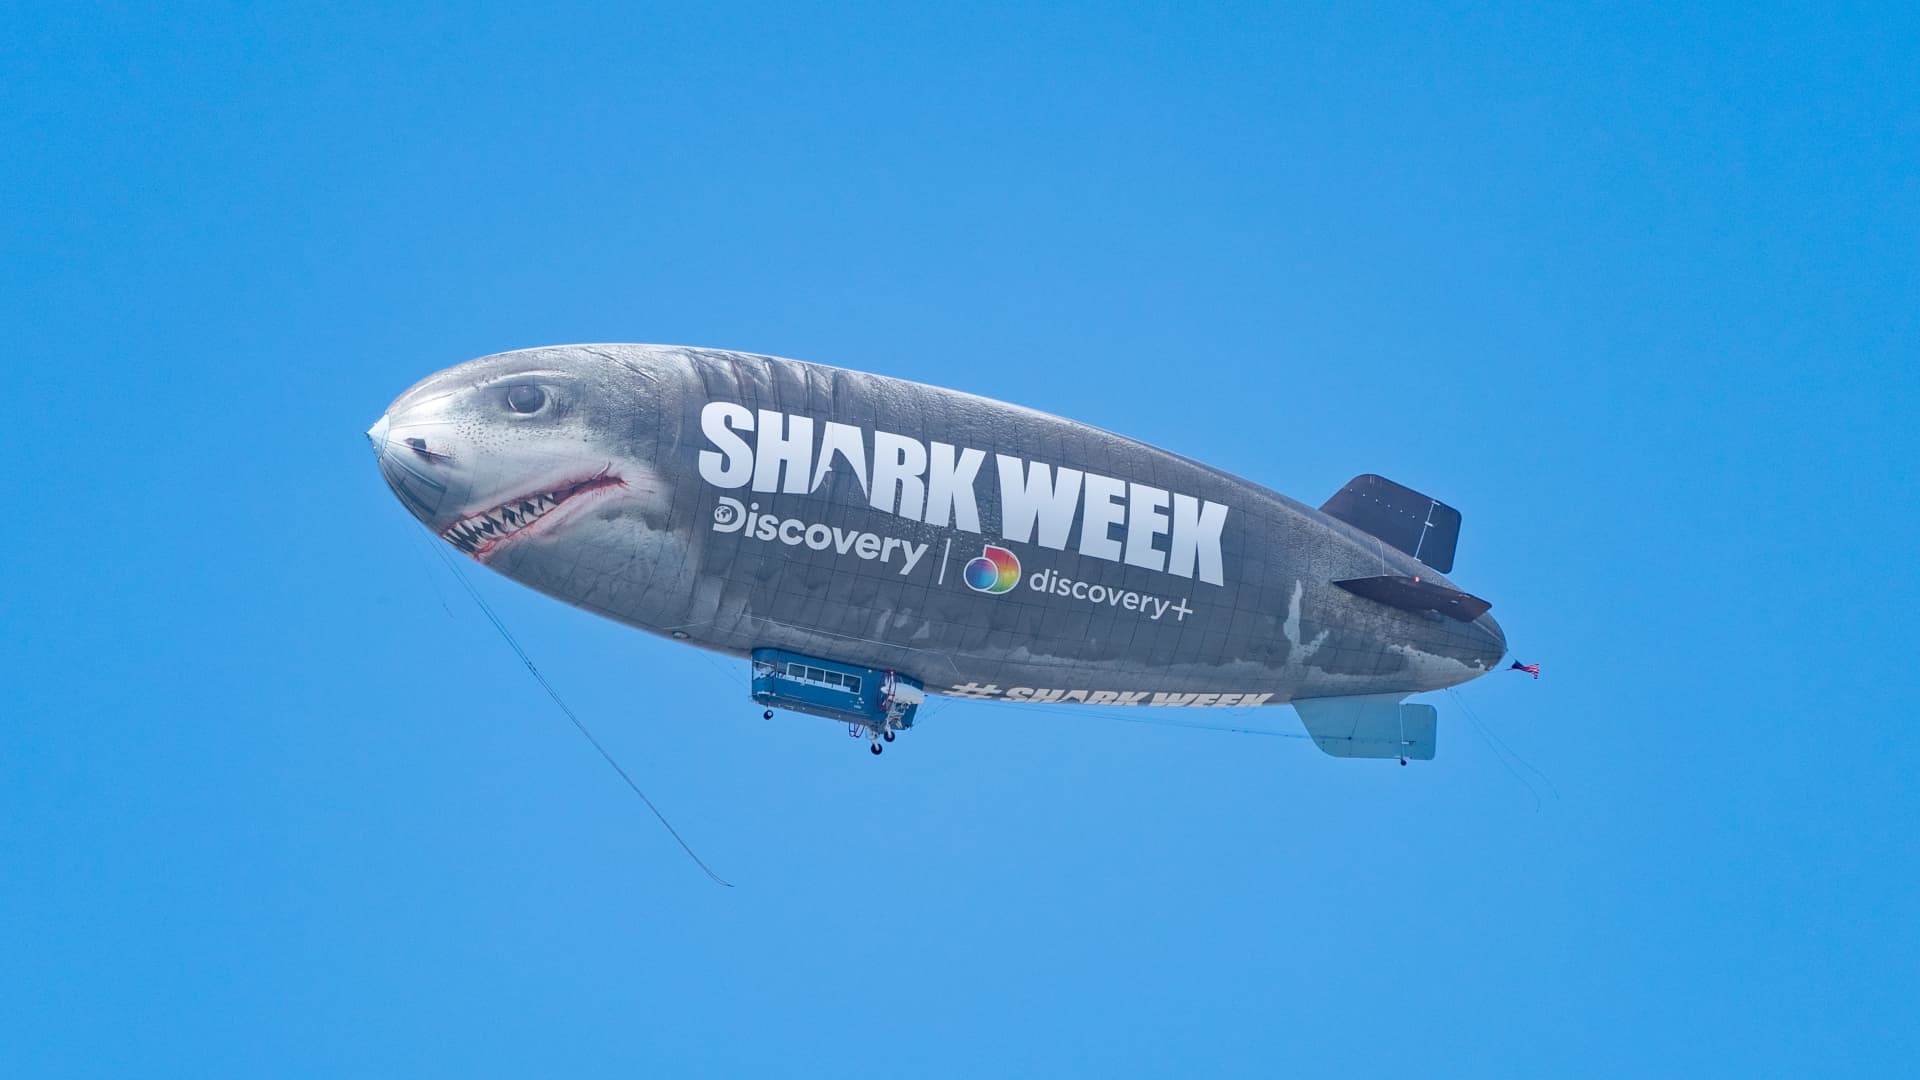 A 'Shark Week' blimp flies over the San Diego Convention Center on July 23, 2022.